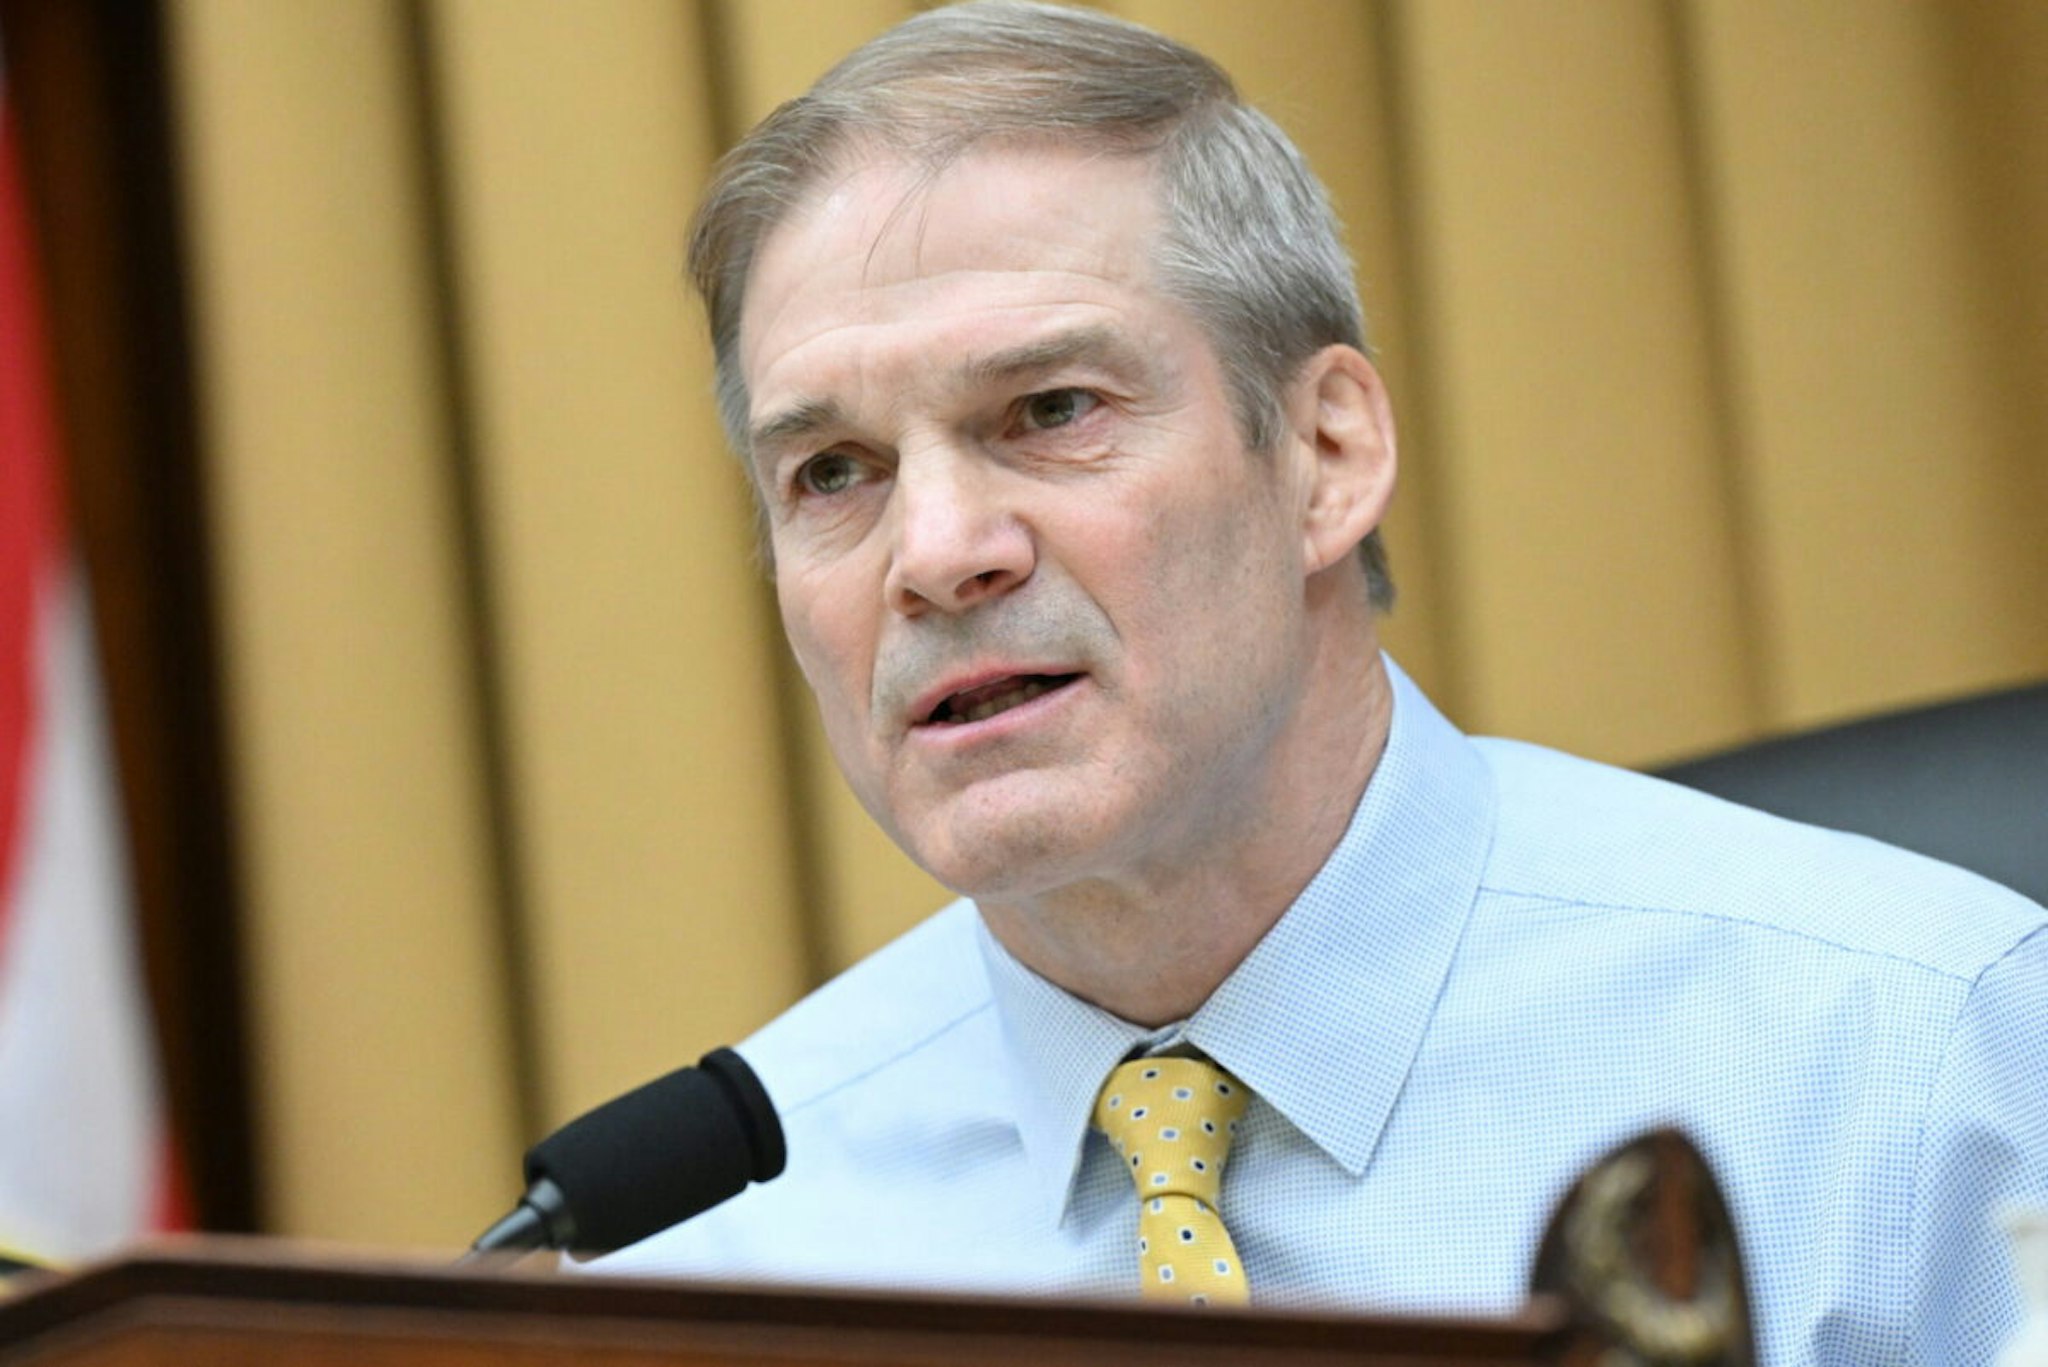 US Representative and Chairman Jim Jordan, Republican of Ohio, speaks during the testimony of Special Counsel Robert Hur before a House Judiciary Committee hearing on his probe into US President Joe Biden's alleged mishandling of classified materials after serving as vice president, on Capitol Hill in Washington, DC, March 12, 2024.